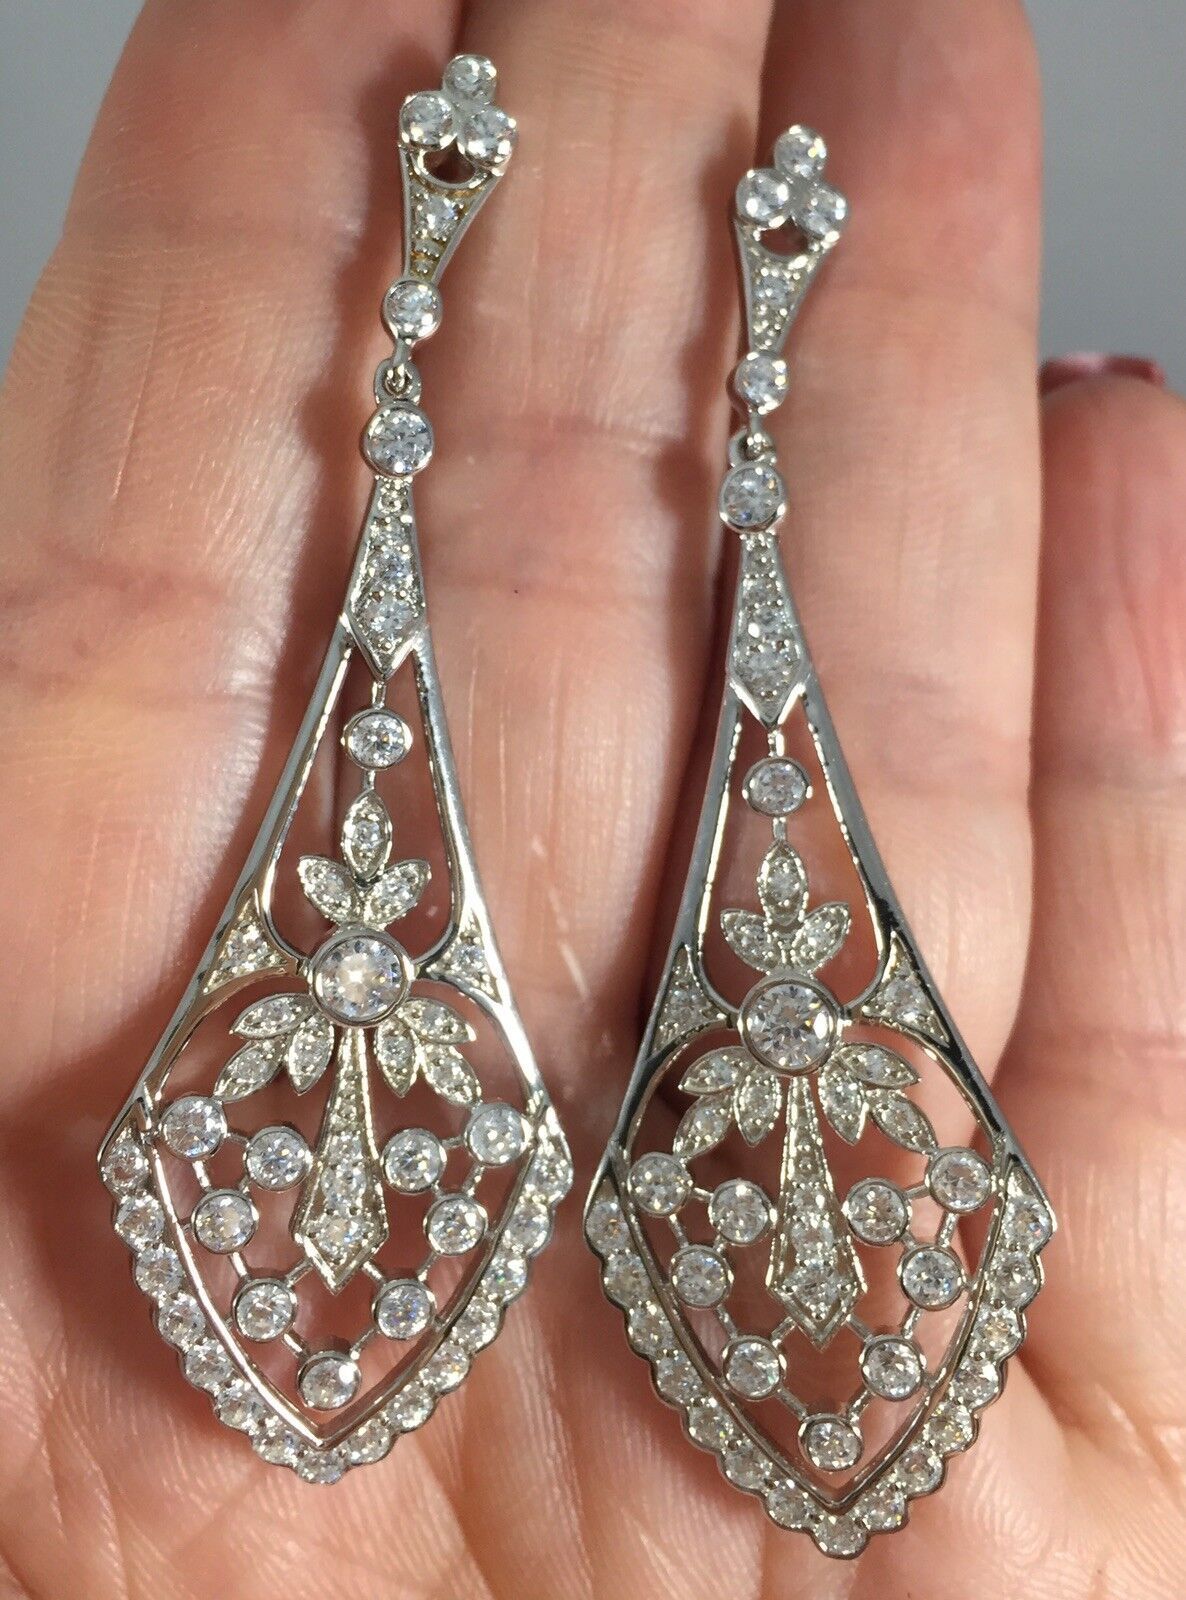 Gorgeous Sterling Silver and Cubic Zirconia Dangle Earrings, New